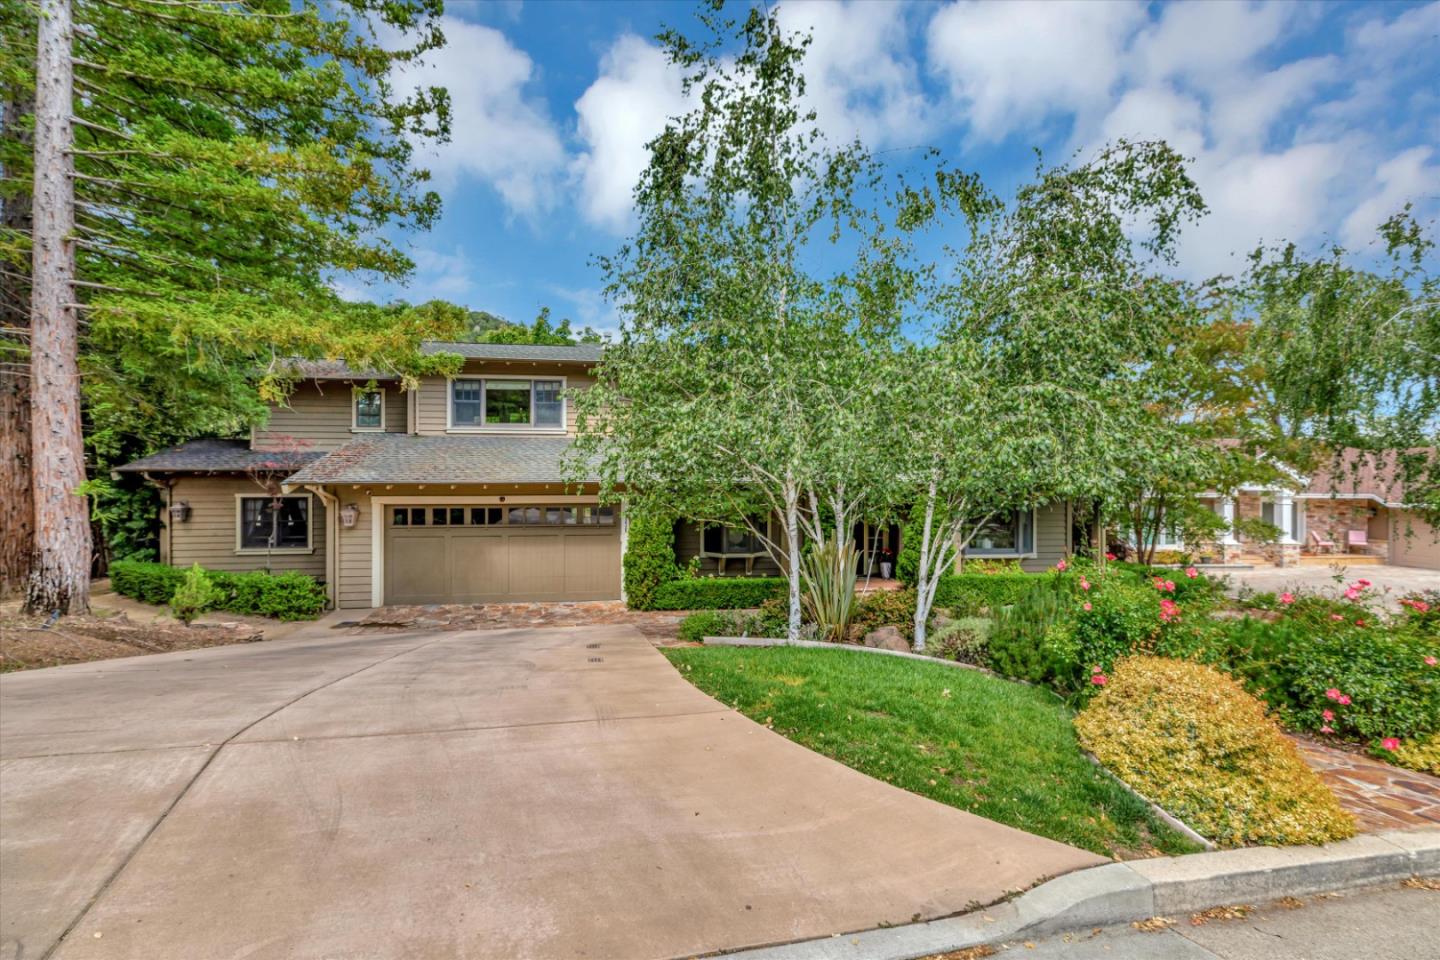 7170 Wooded Lake Dr, San Jose, CA 95120 4 Beds 3/1 Baths (Sold